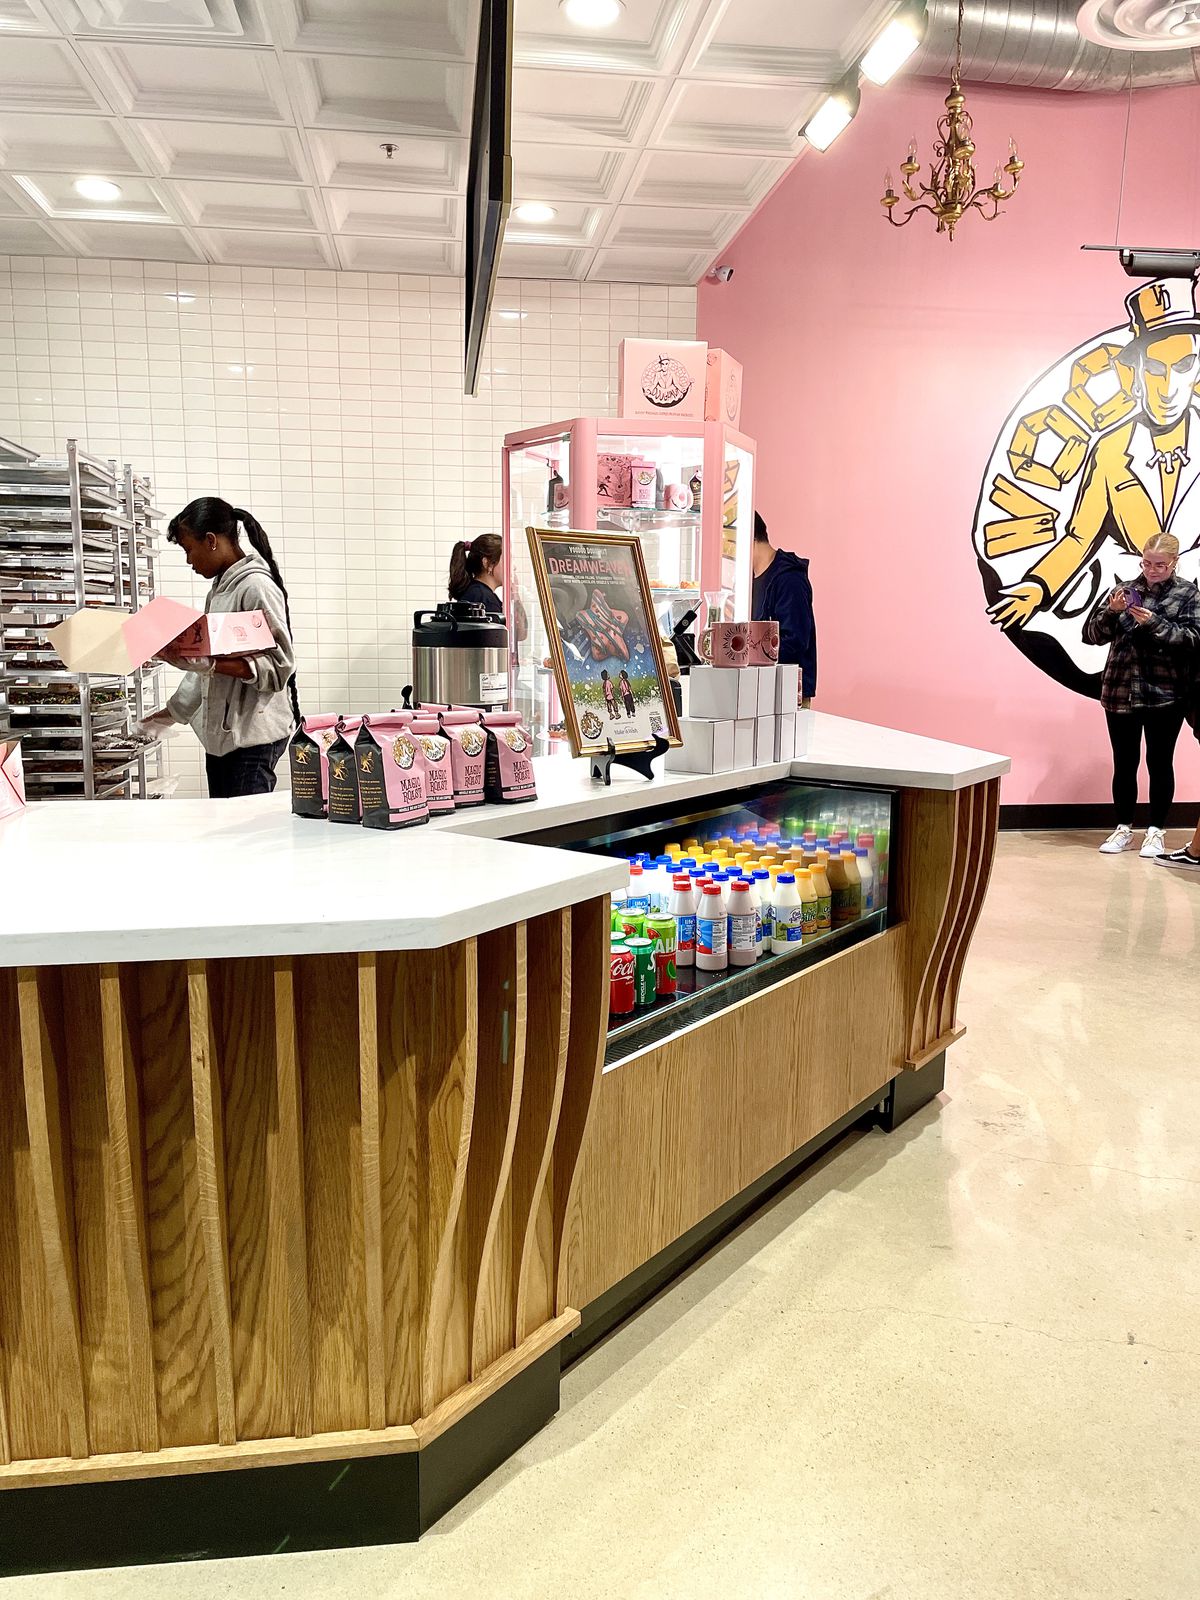 In a doughnut shop with a pink wall and white subway tiles, a woman stands at a rack and loads goods into a pink bakery box. 